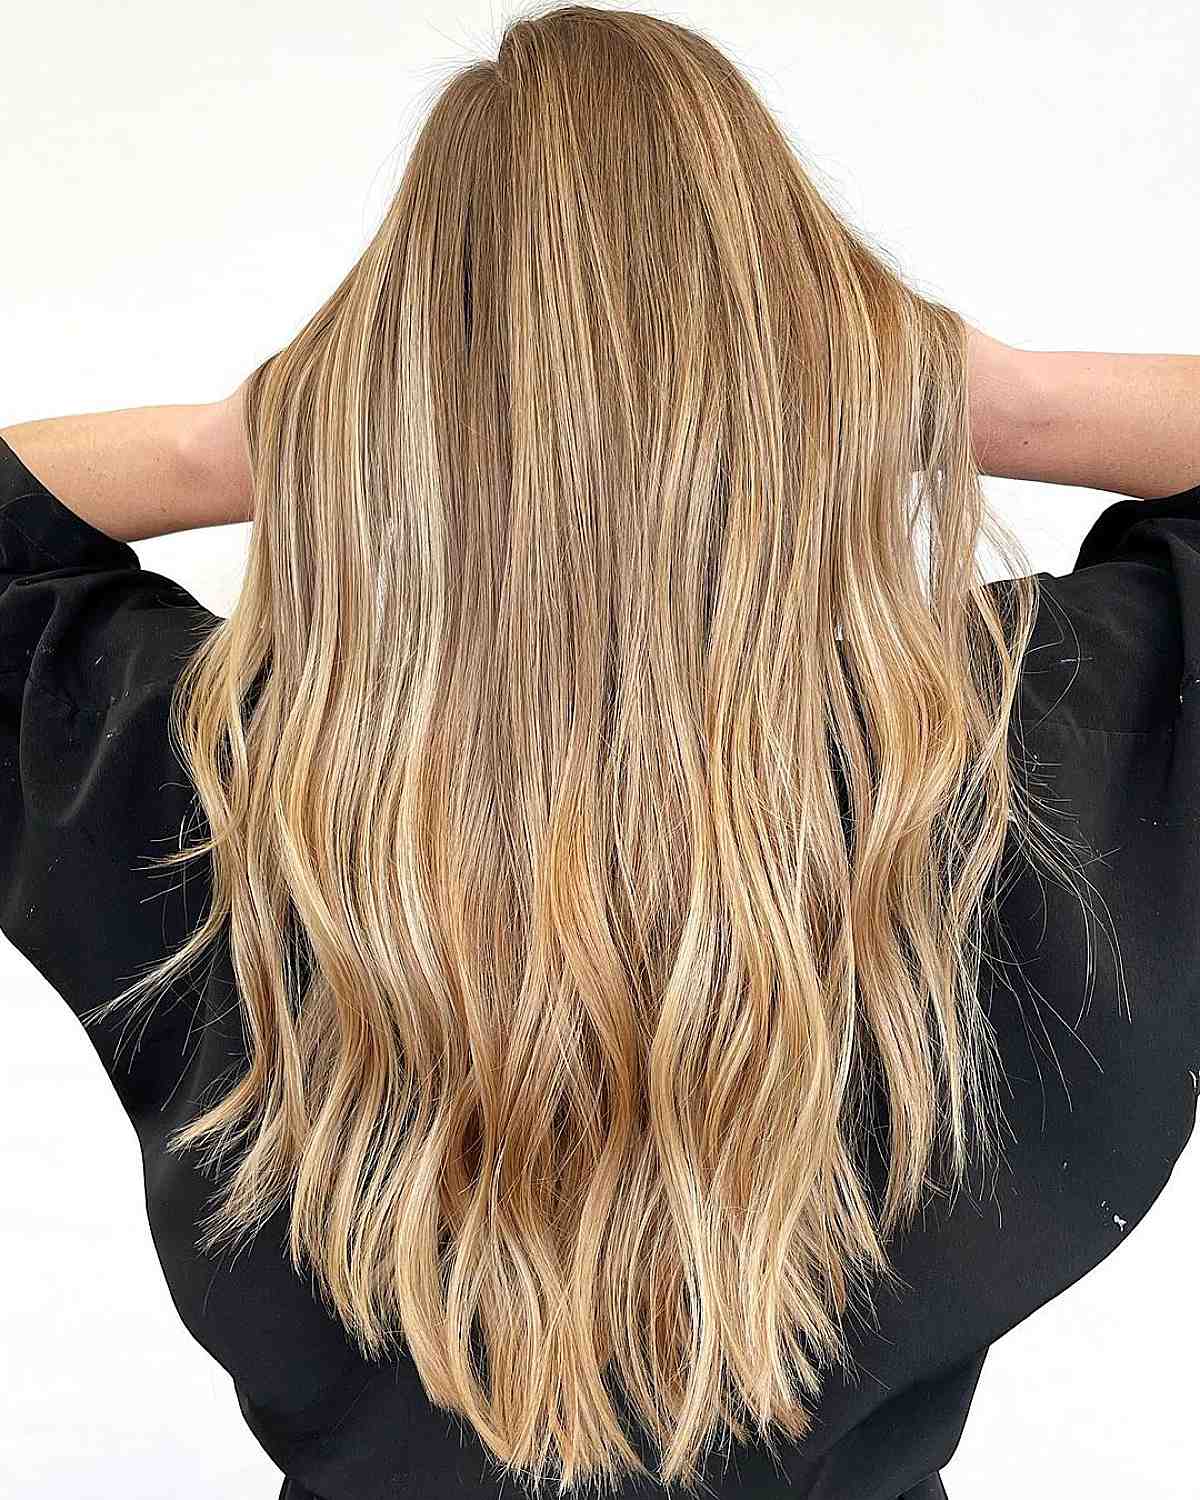 The Top 45 Hairstyles for Long Blonde Hair in 2023